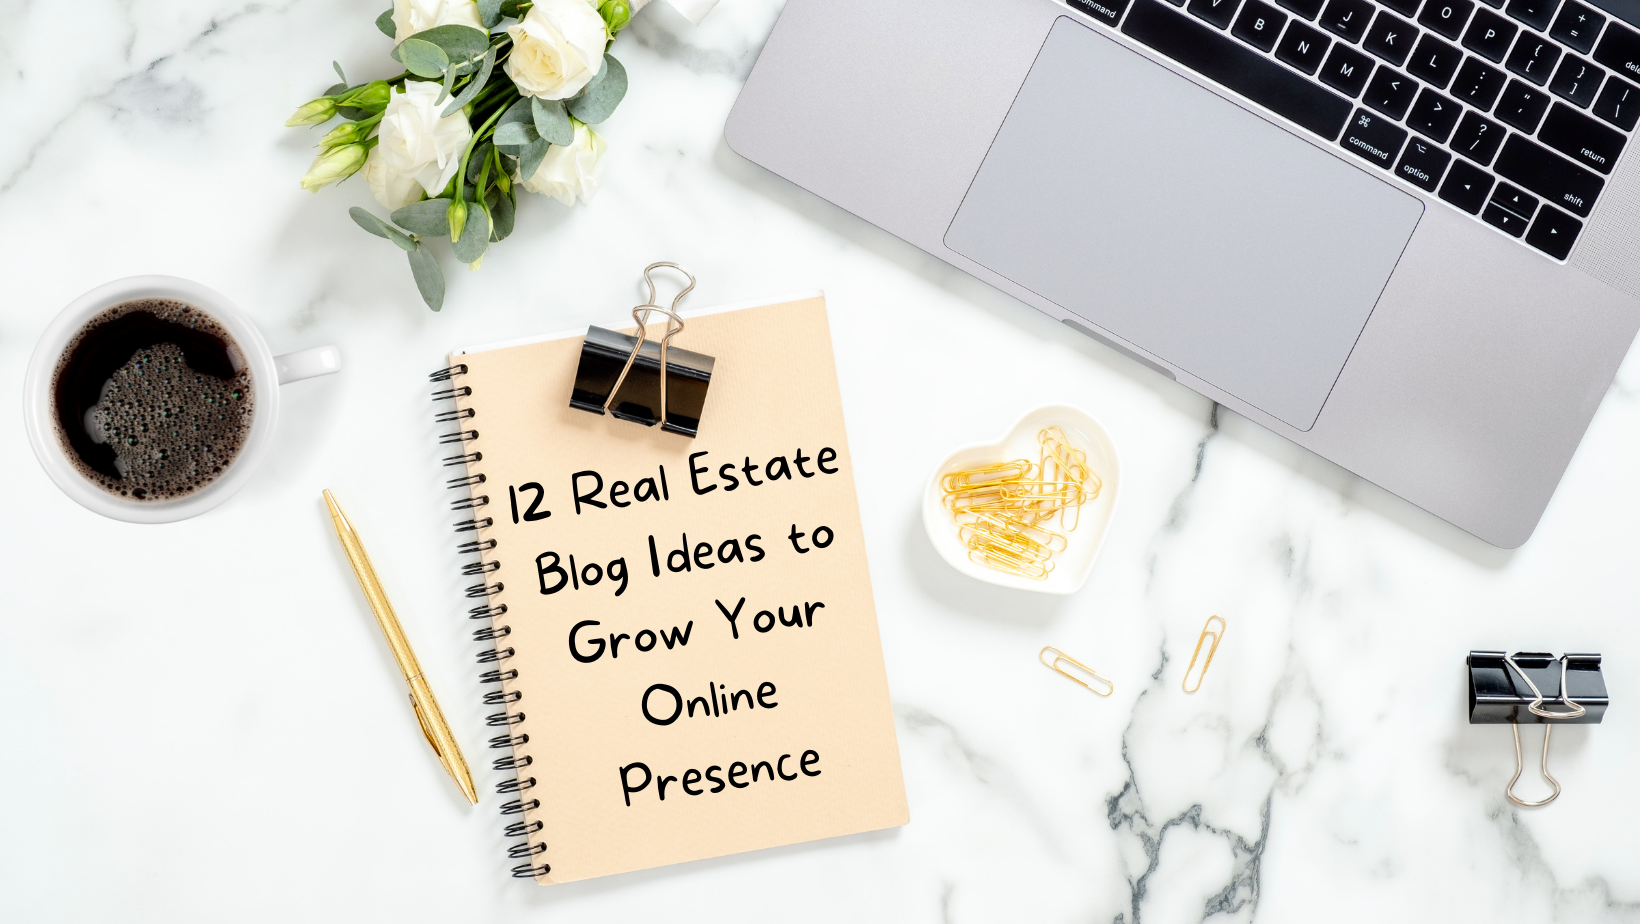 12 Real Estate Blog Ideas to Grow Your Online Presence - journal and laptop desk flatlay